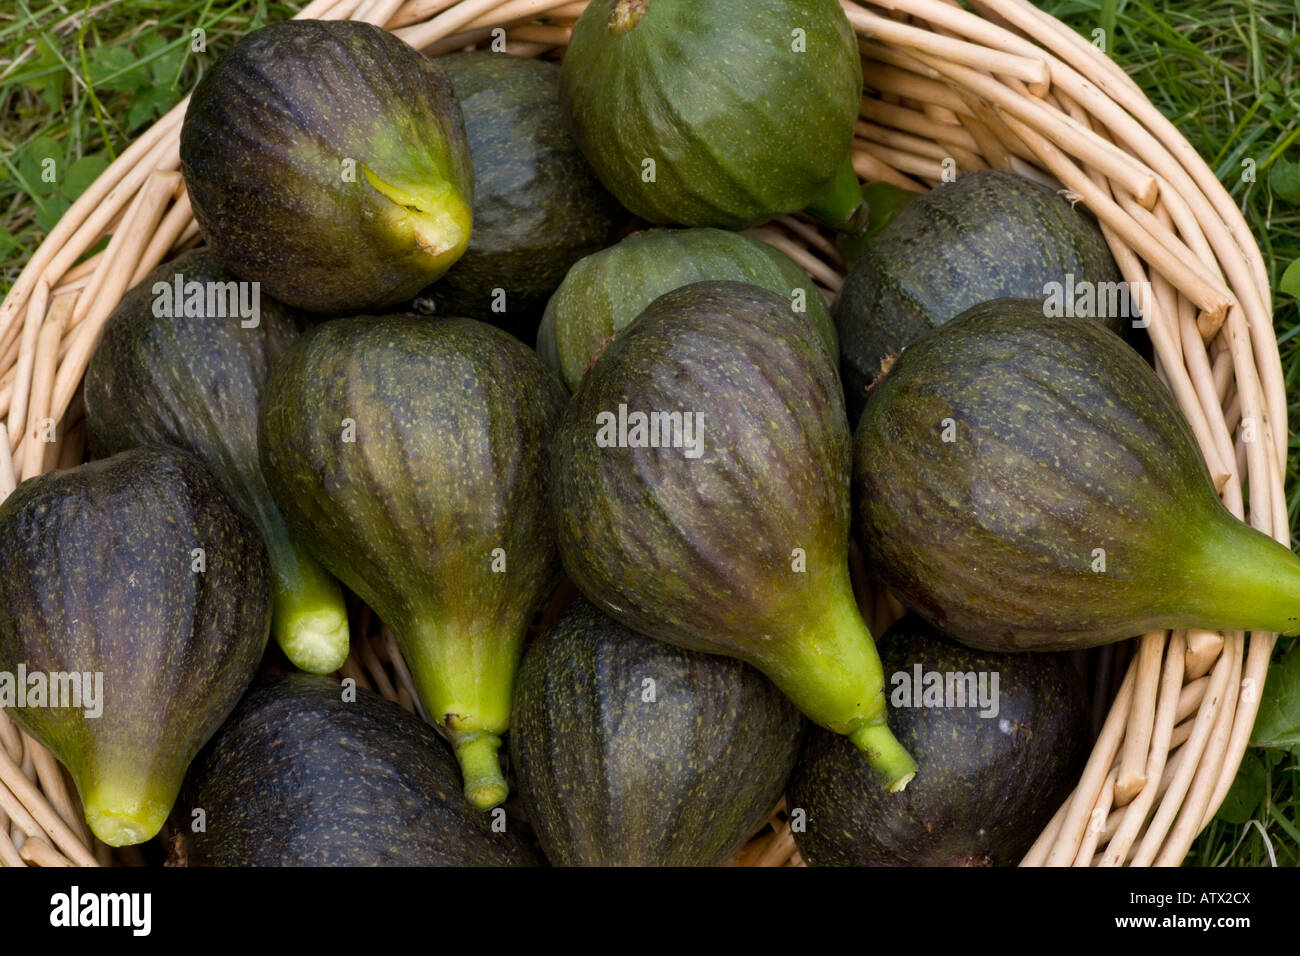 Organic figs (Ficus carica) grown and picked in Dorset, England, UK Stock Photo